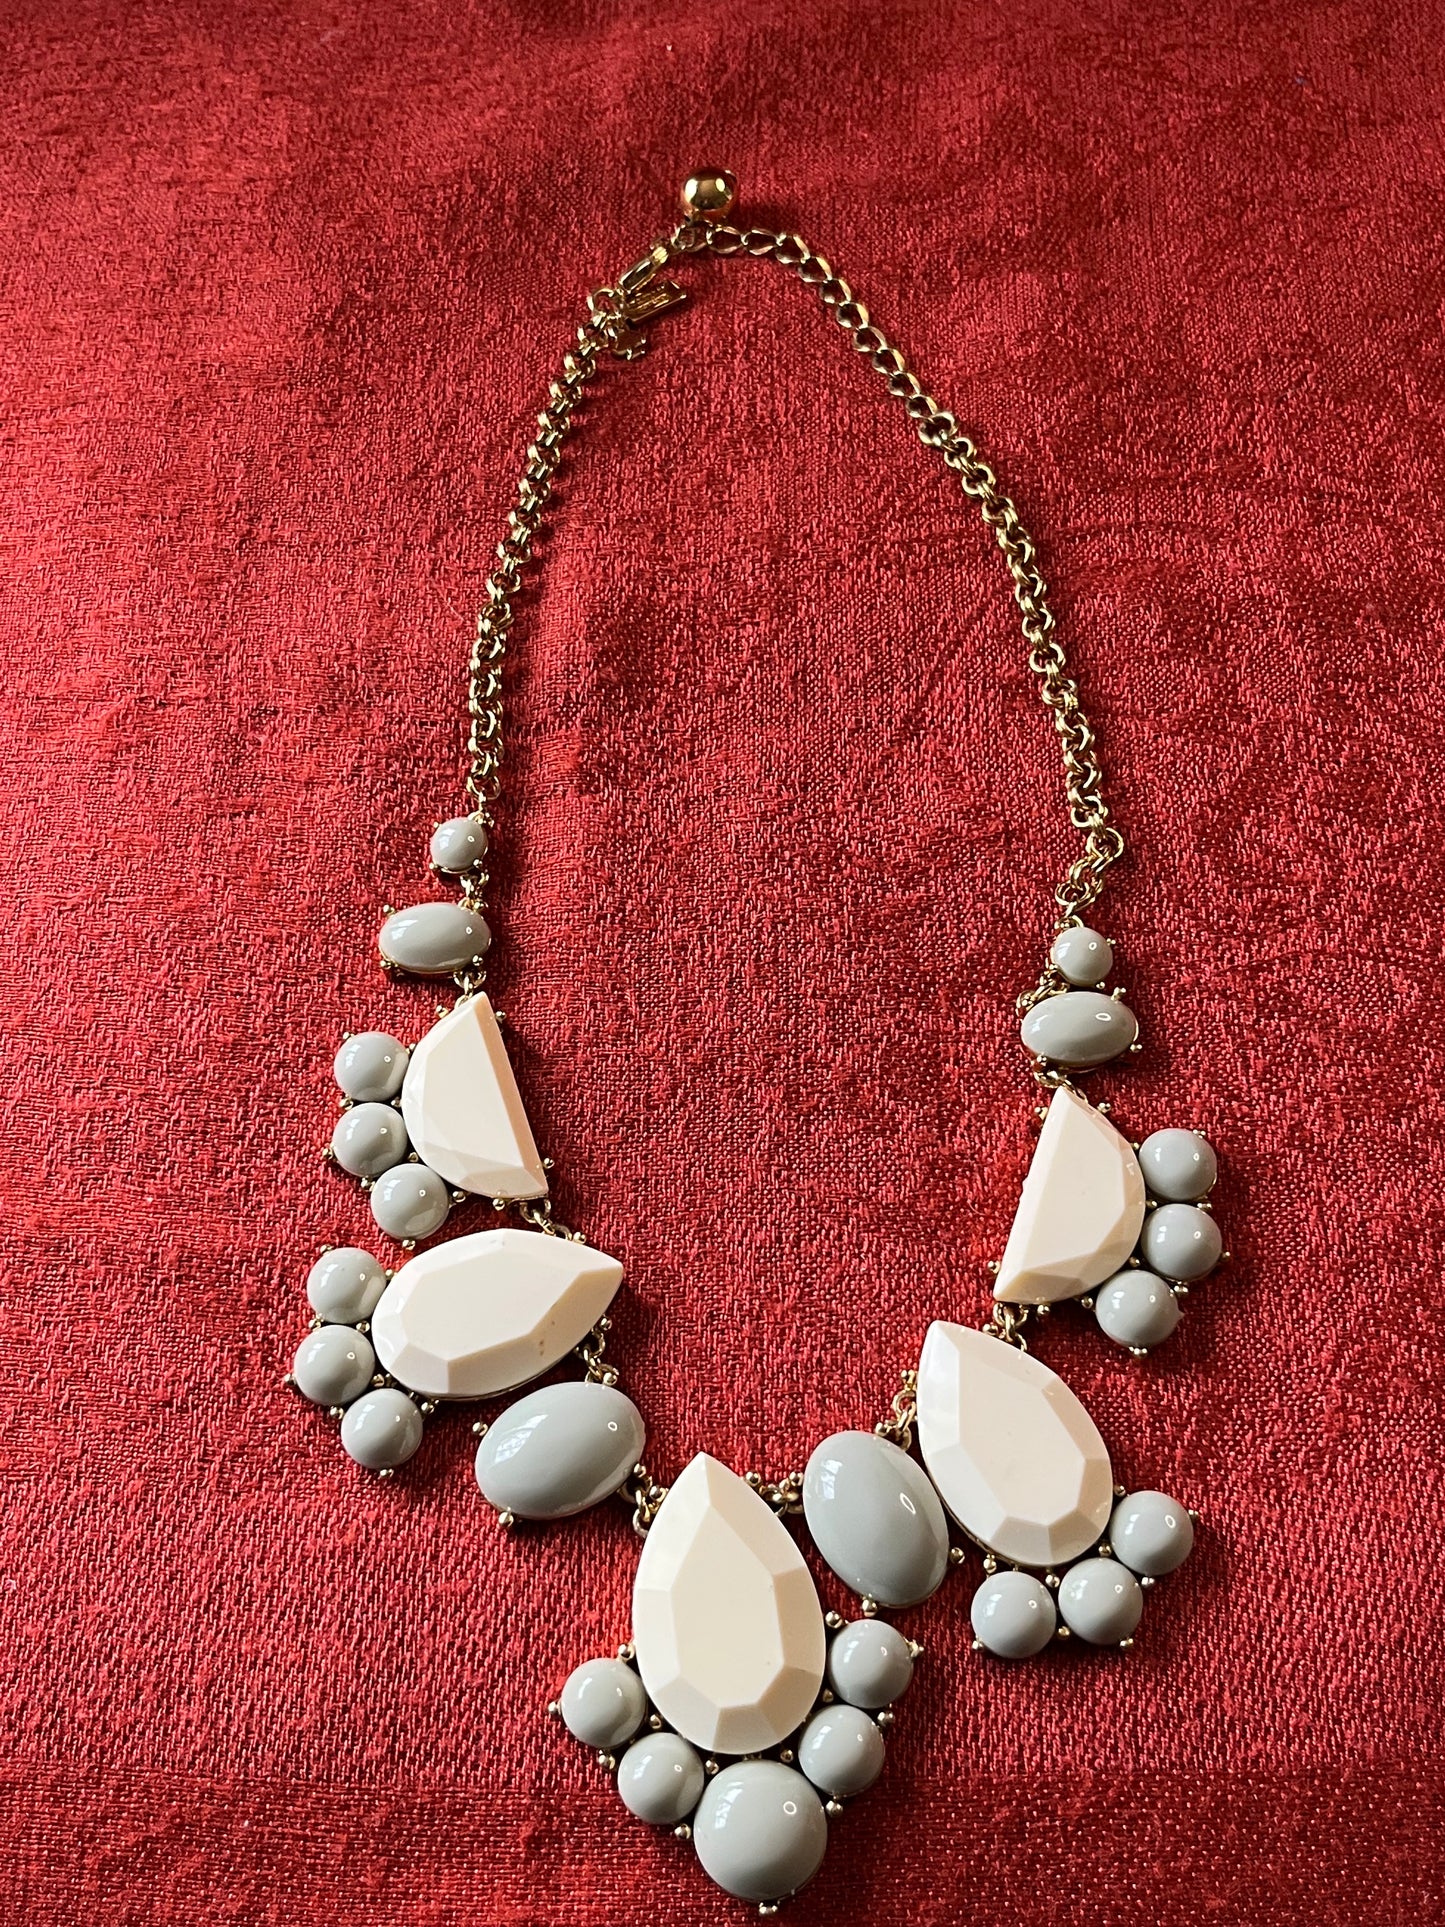 Kate Spade New York Cream and Sage Colored Statement Necklace